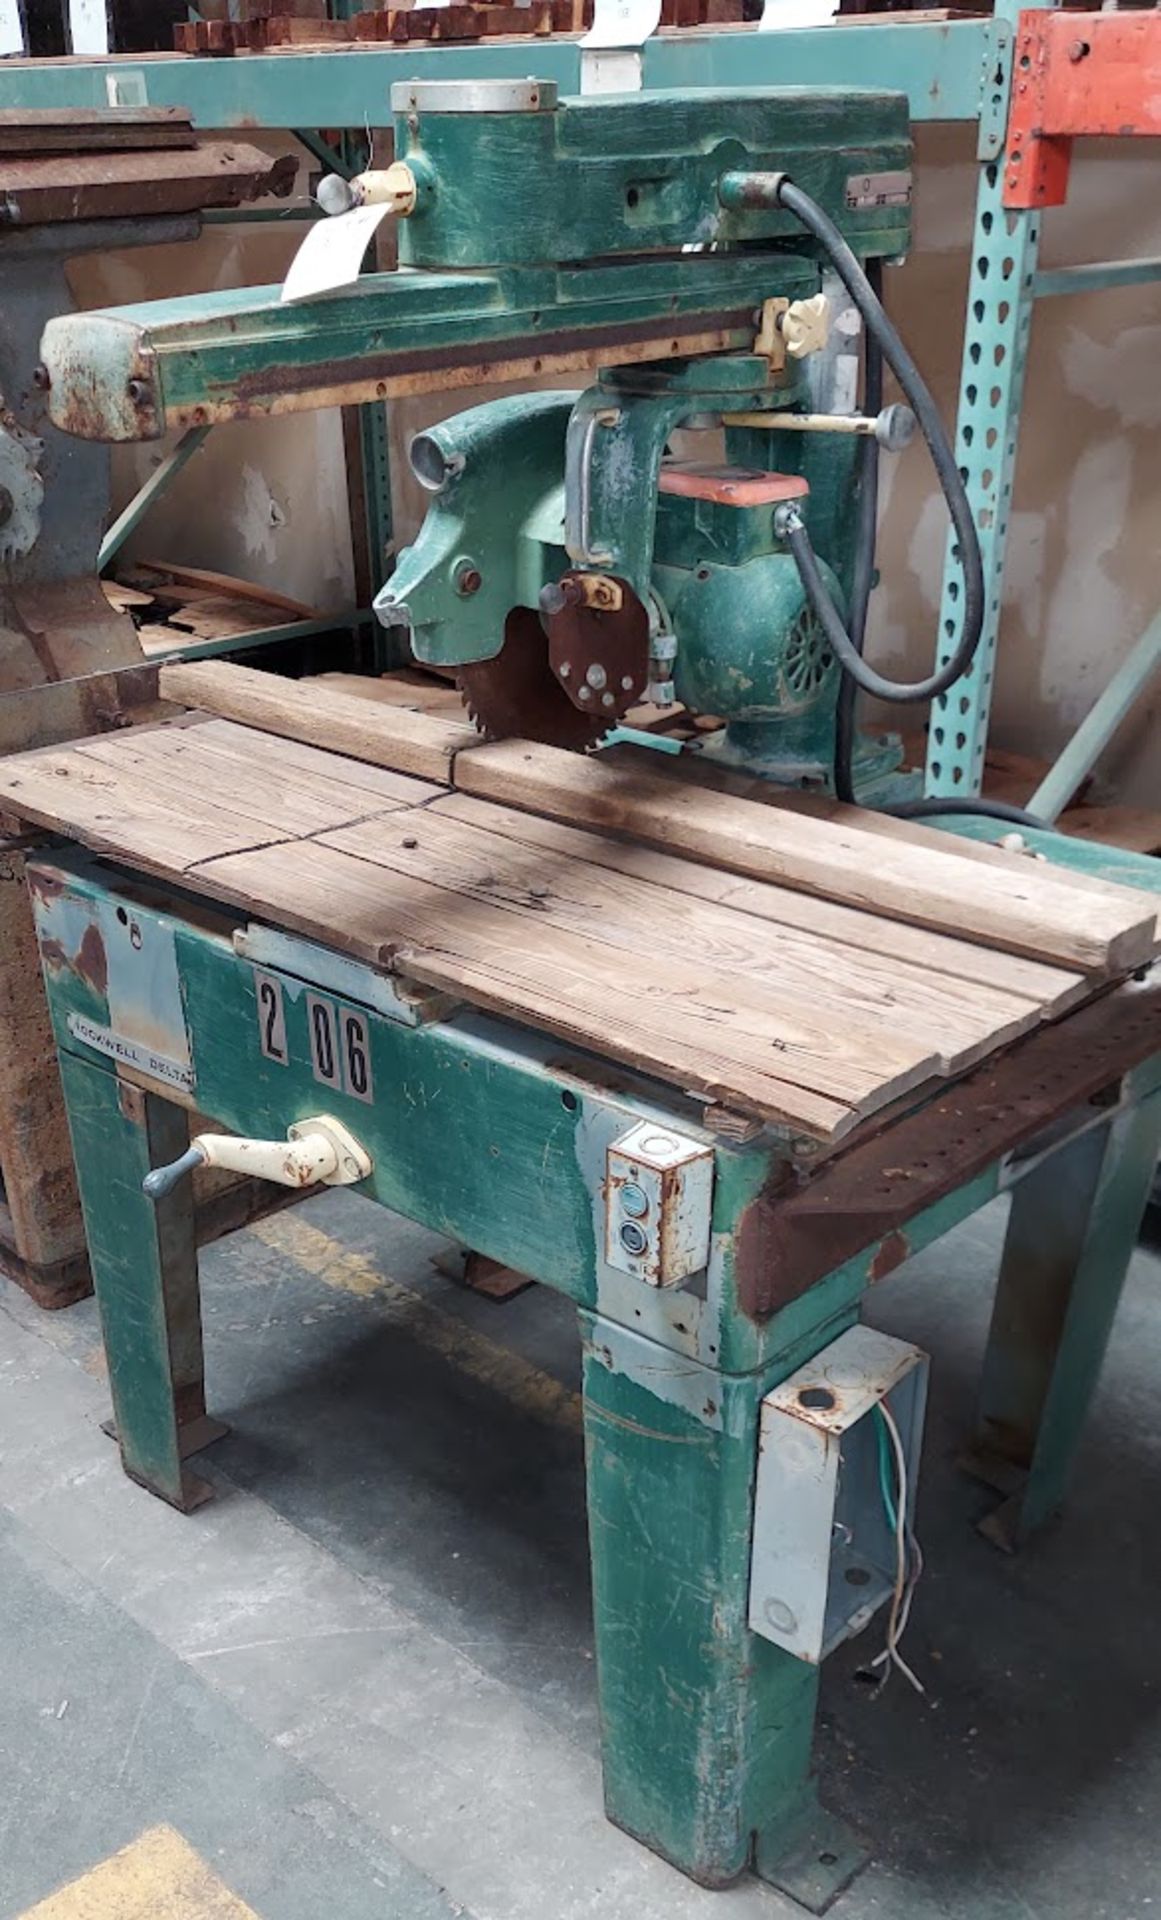 Delta / Rockwell 14" Radial Arm Saw, Model #14-RAS, 3 Hp 230/460 volt 3ph Motor, Made in 1972 - Image 2 of 2